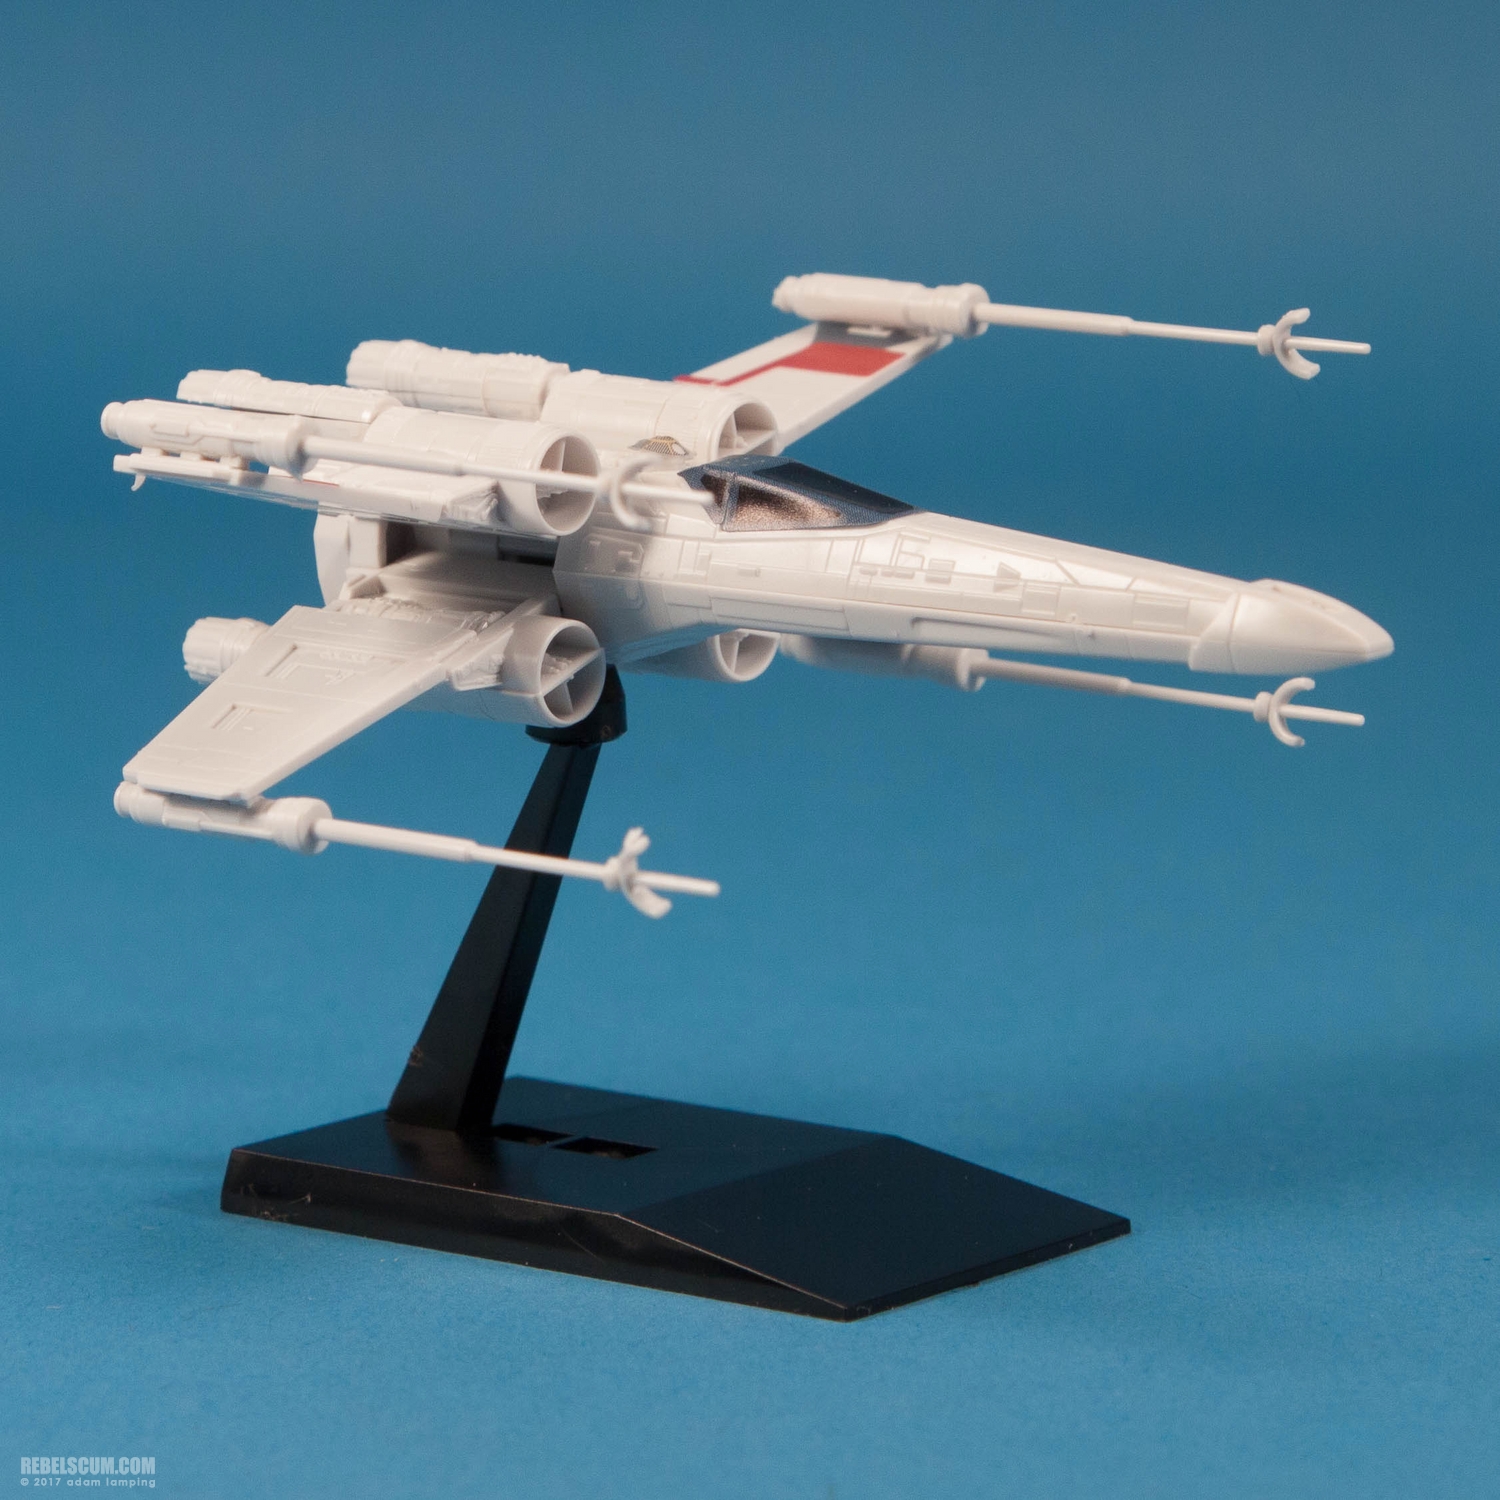 bandai-red-squadron-x-wing-starfighter-scale-model-kit-014.jpg